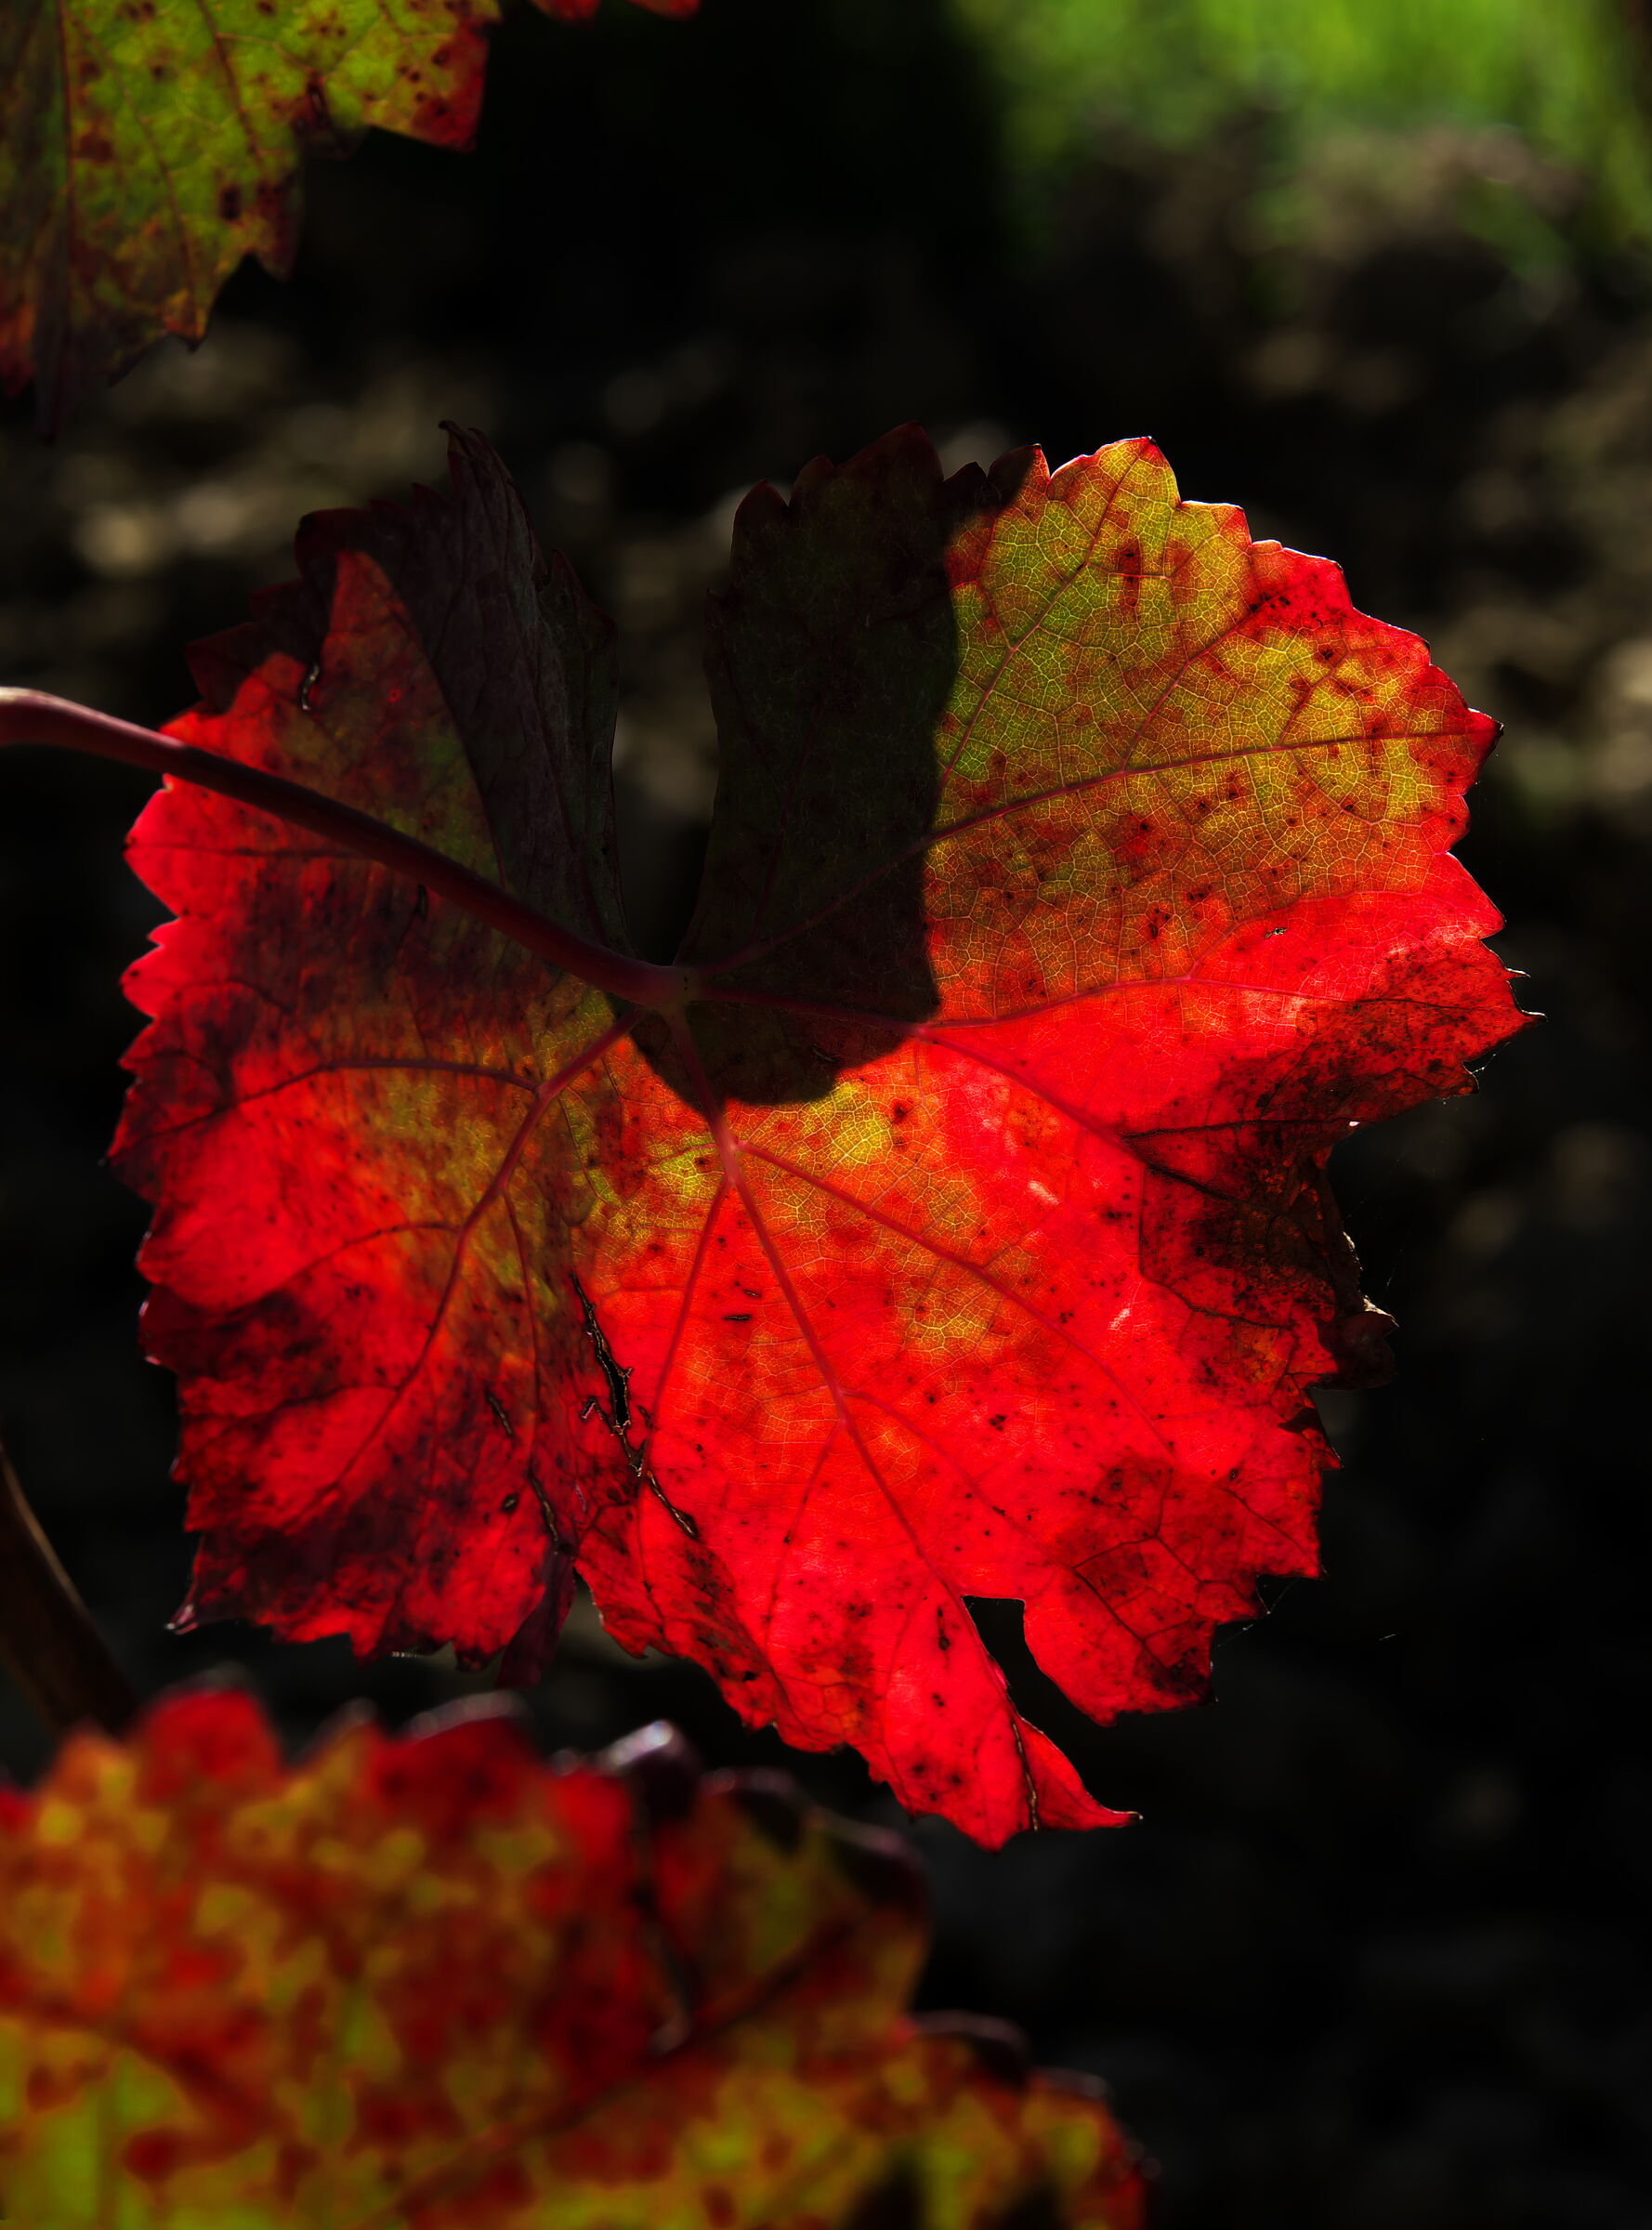 The Red Leaf...